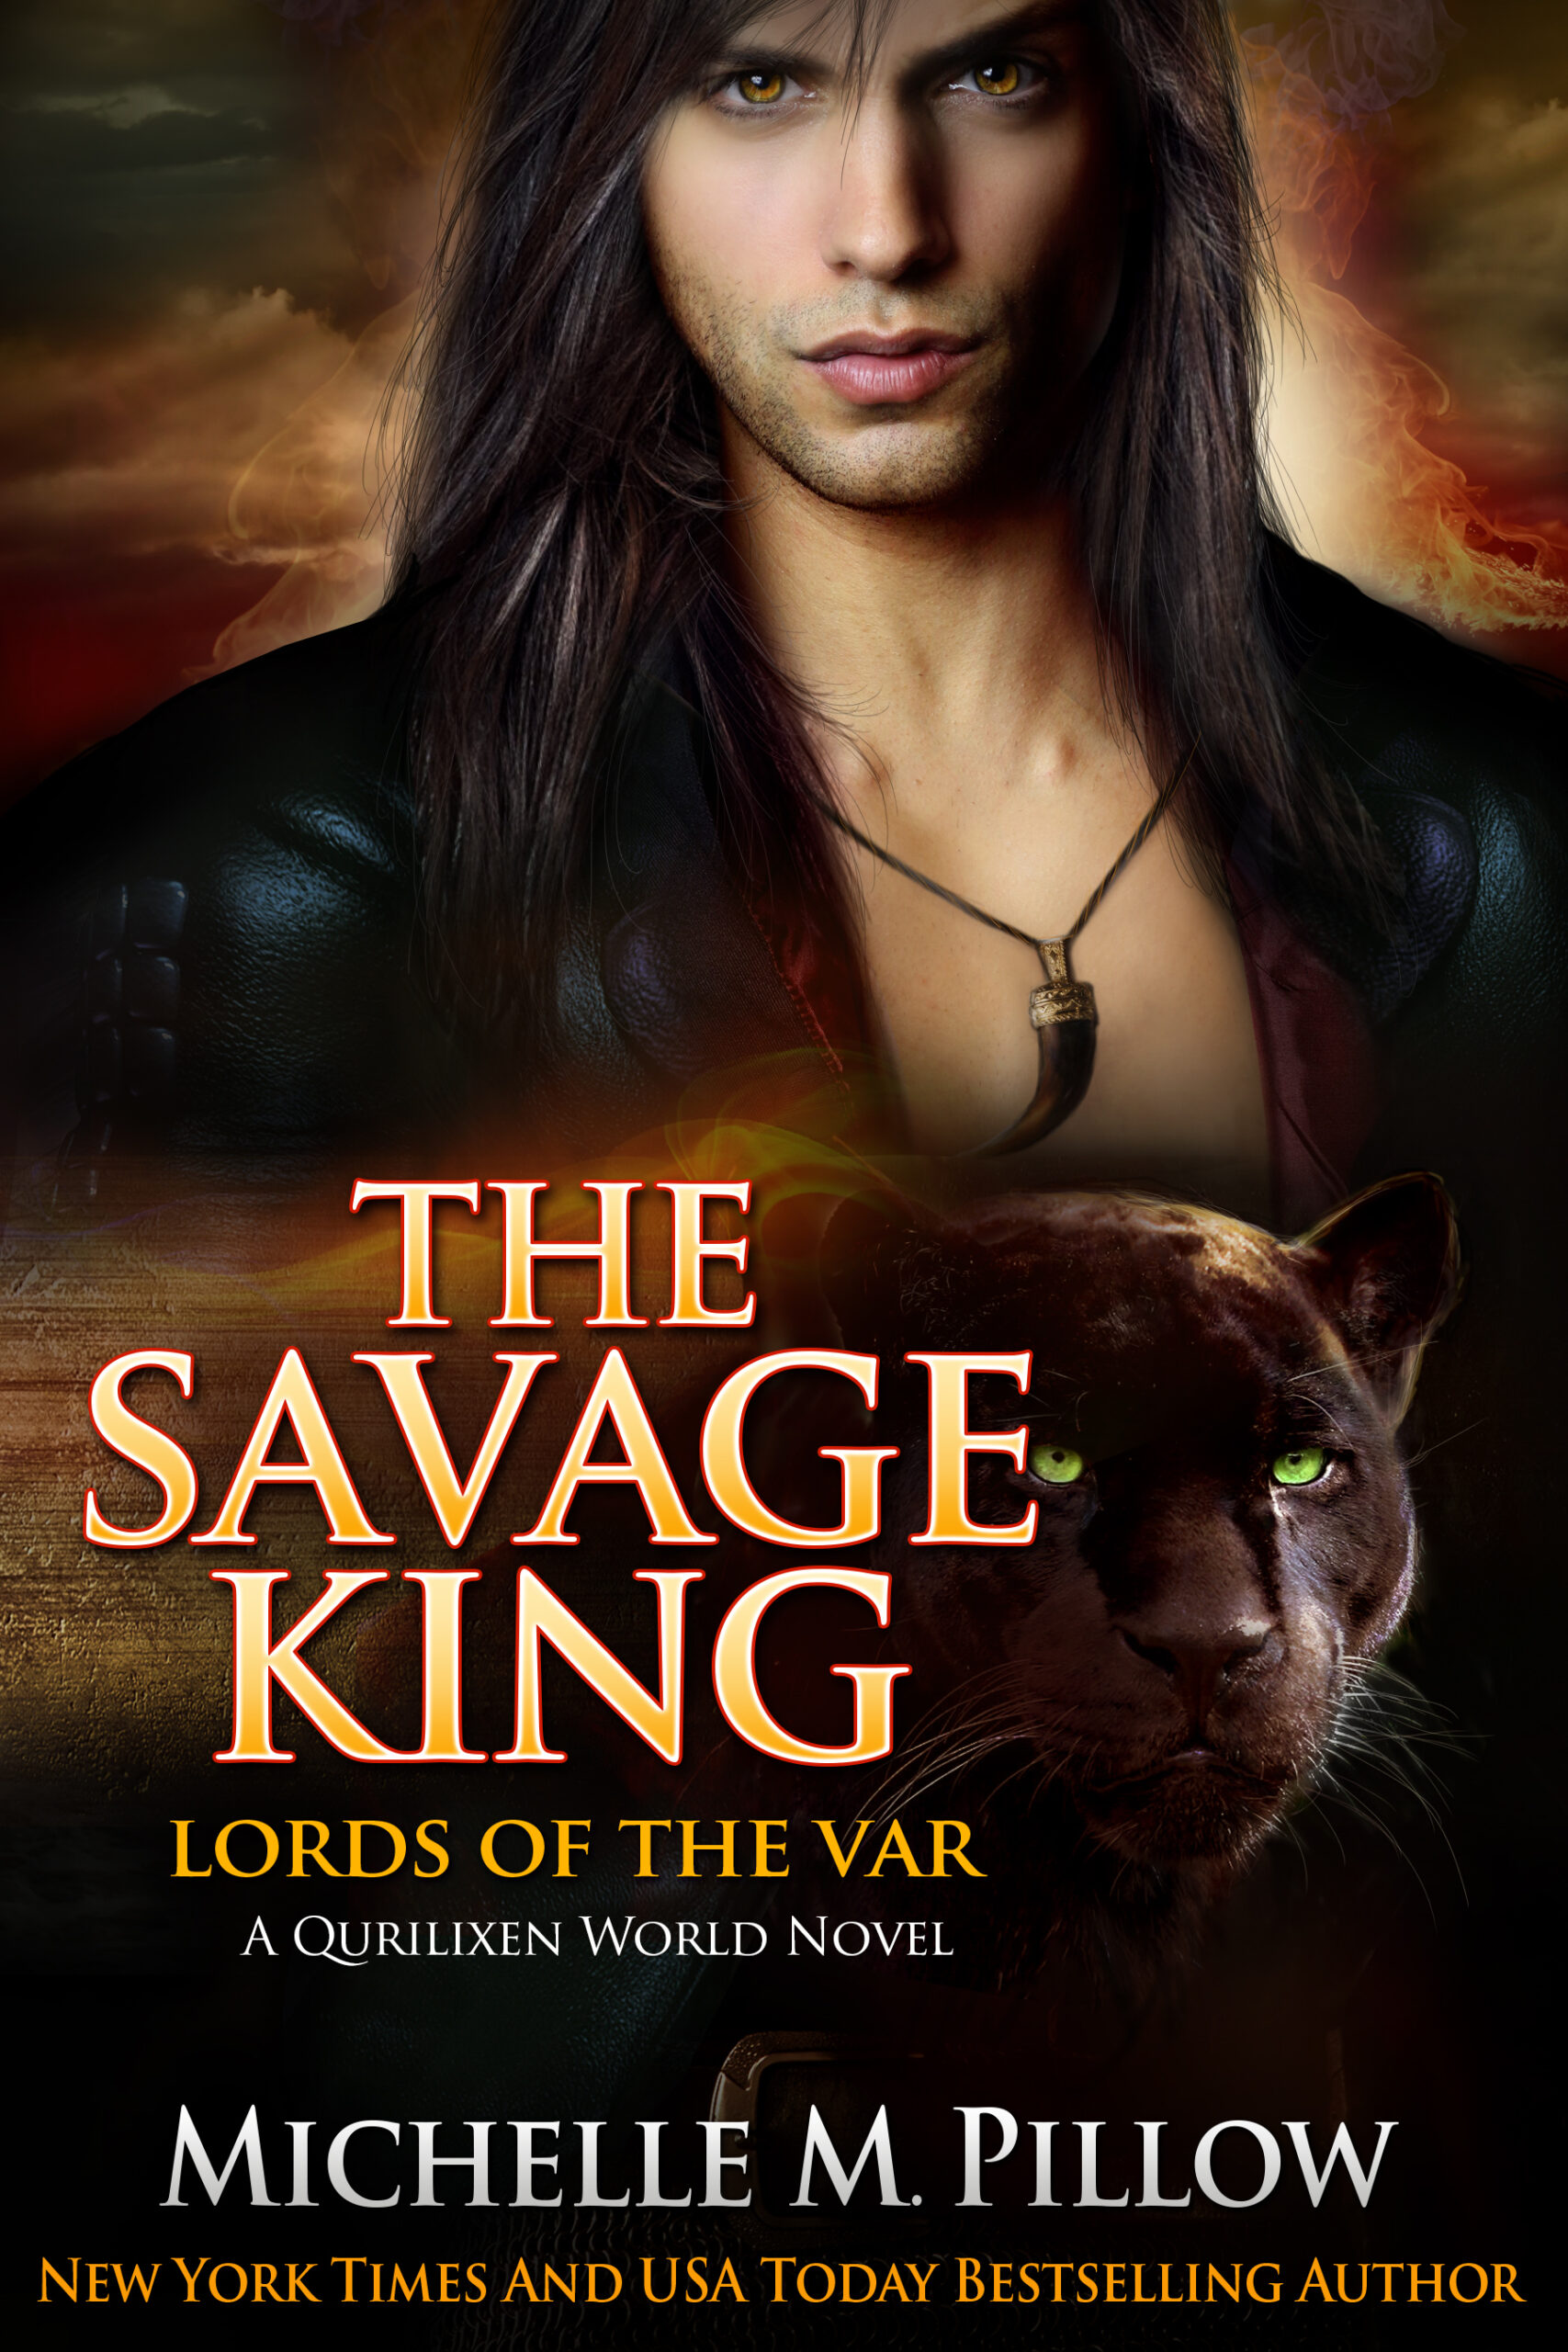 FREE: The Savage King by Michelle M. Pillow